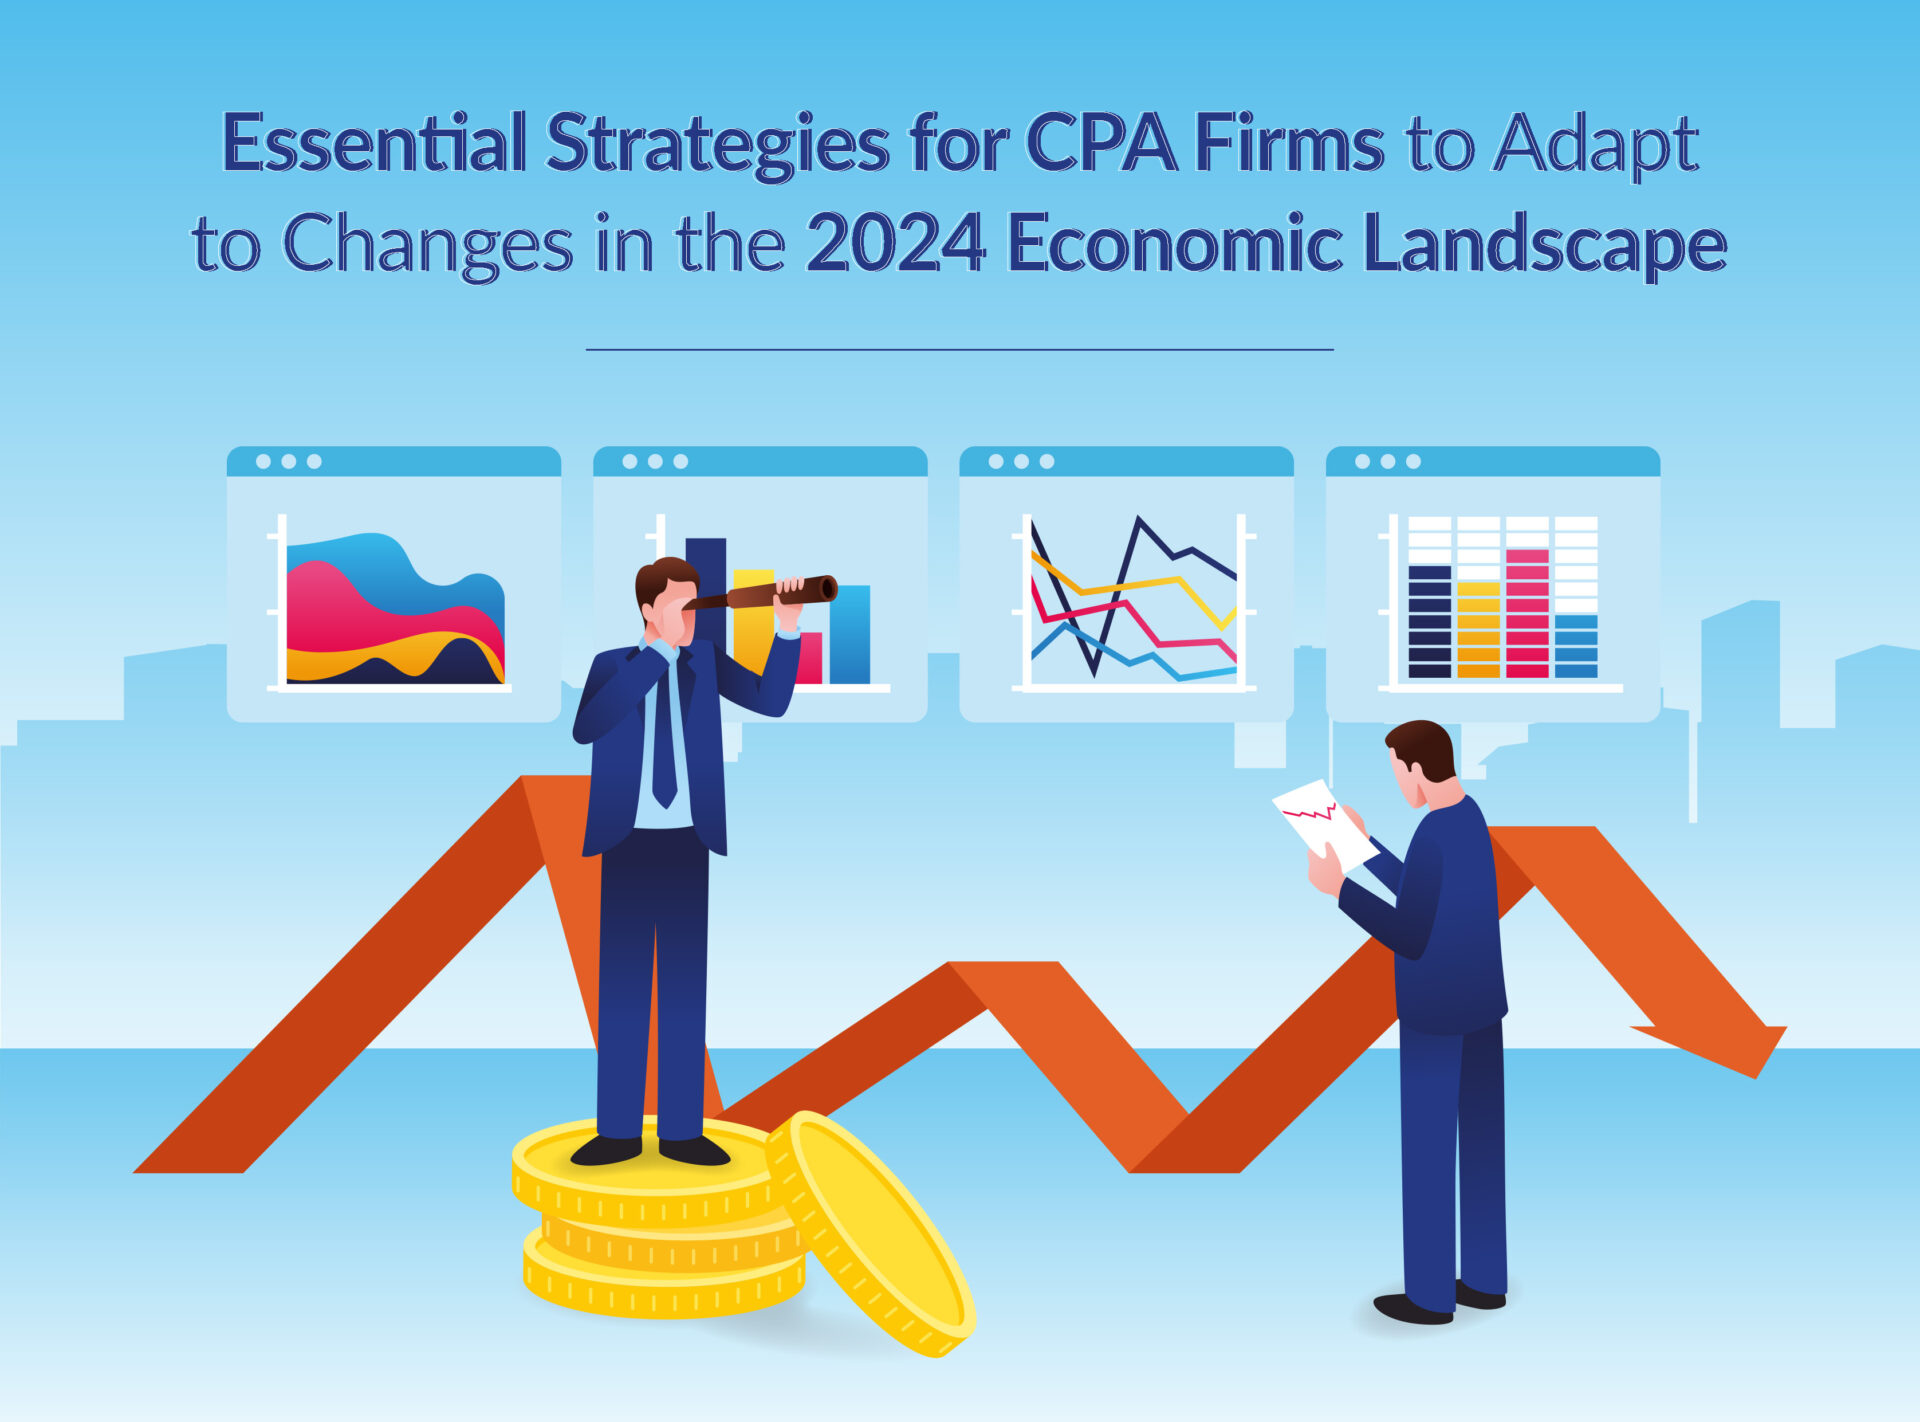 Essential Strategies for CPA Firms to Adapt to Changes in the 2024 Economic Landscape